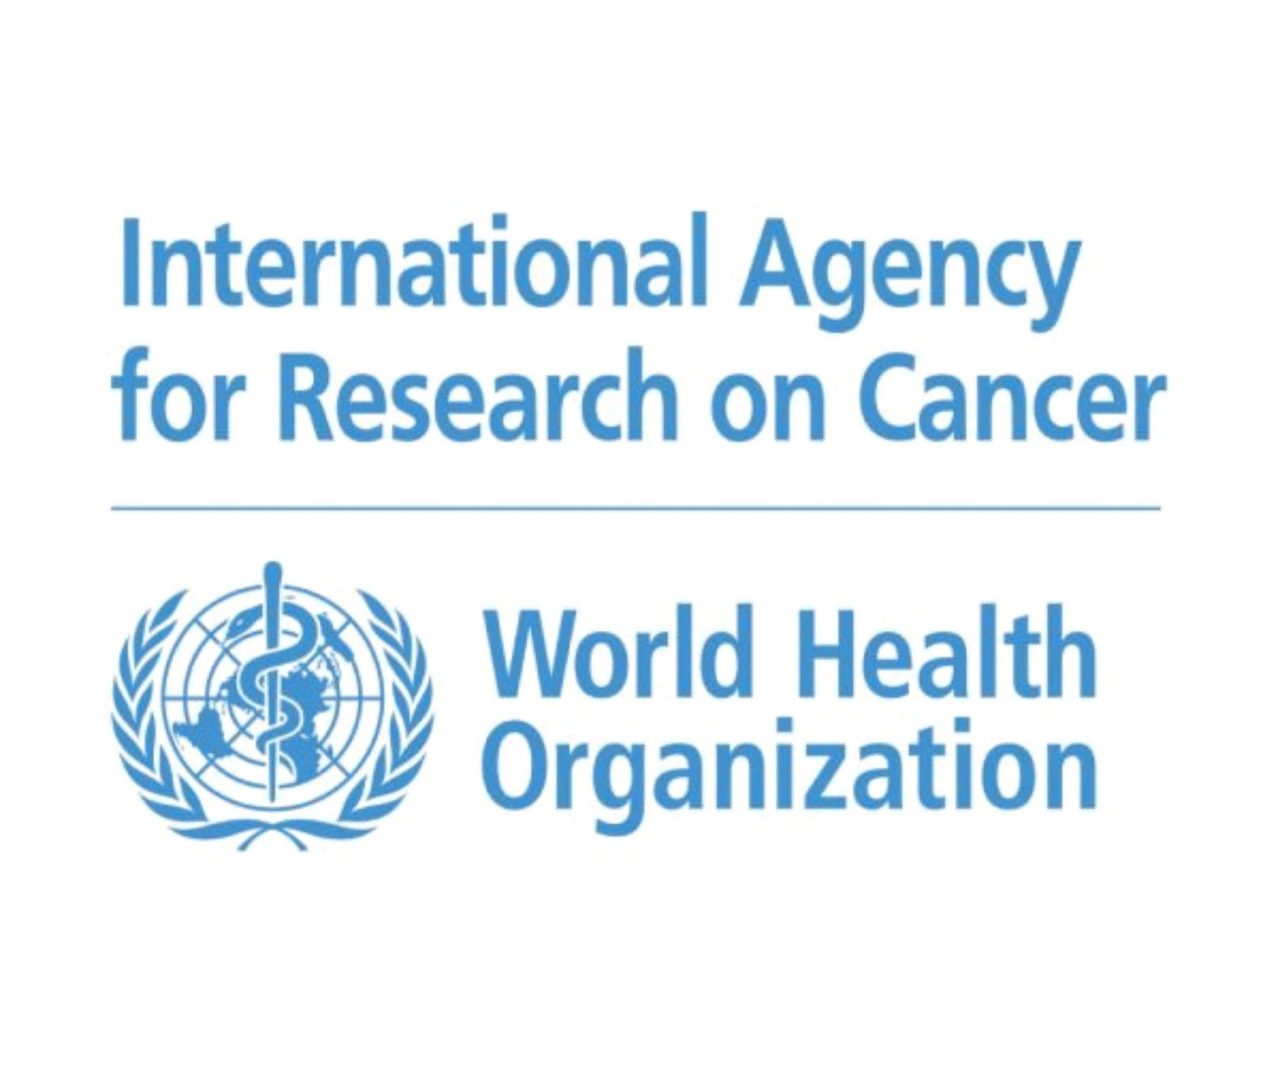 David Kavanagh: Some of the reasons and benefits of working at IARC – International Agency for Research on Cancer / World Health Organization in Lyon, France.